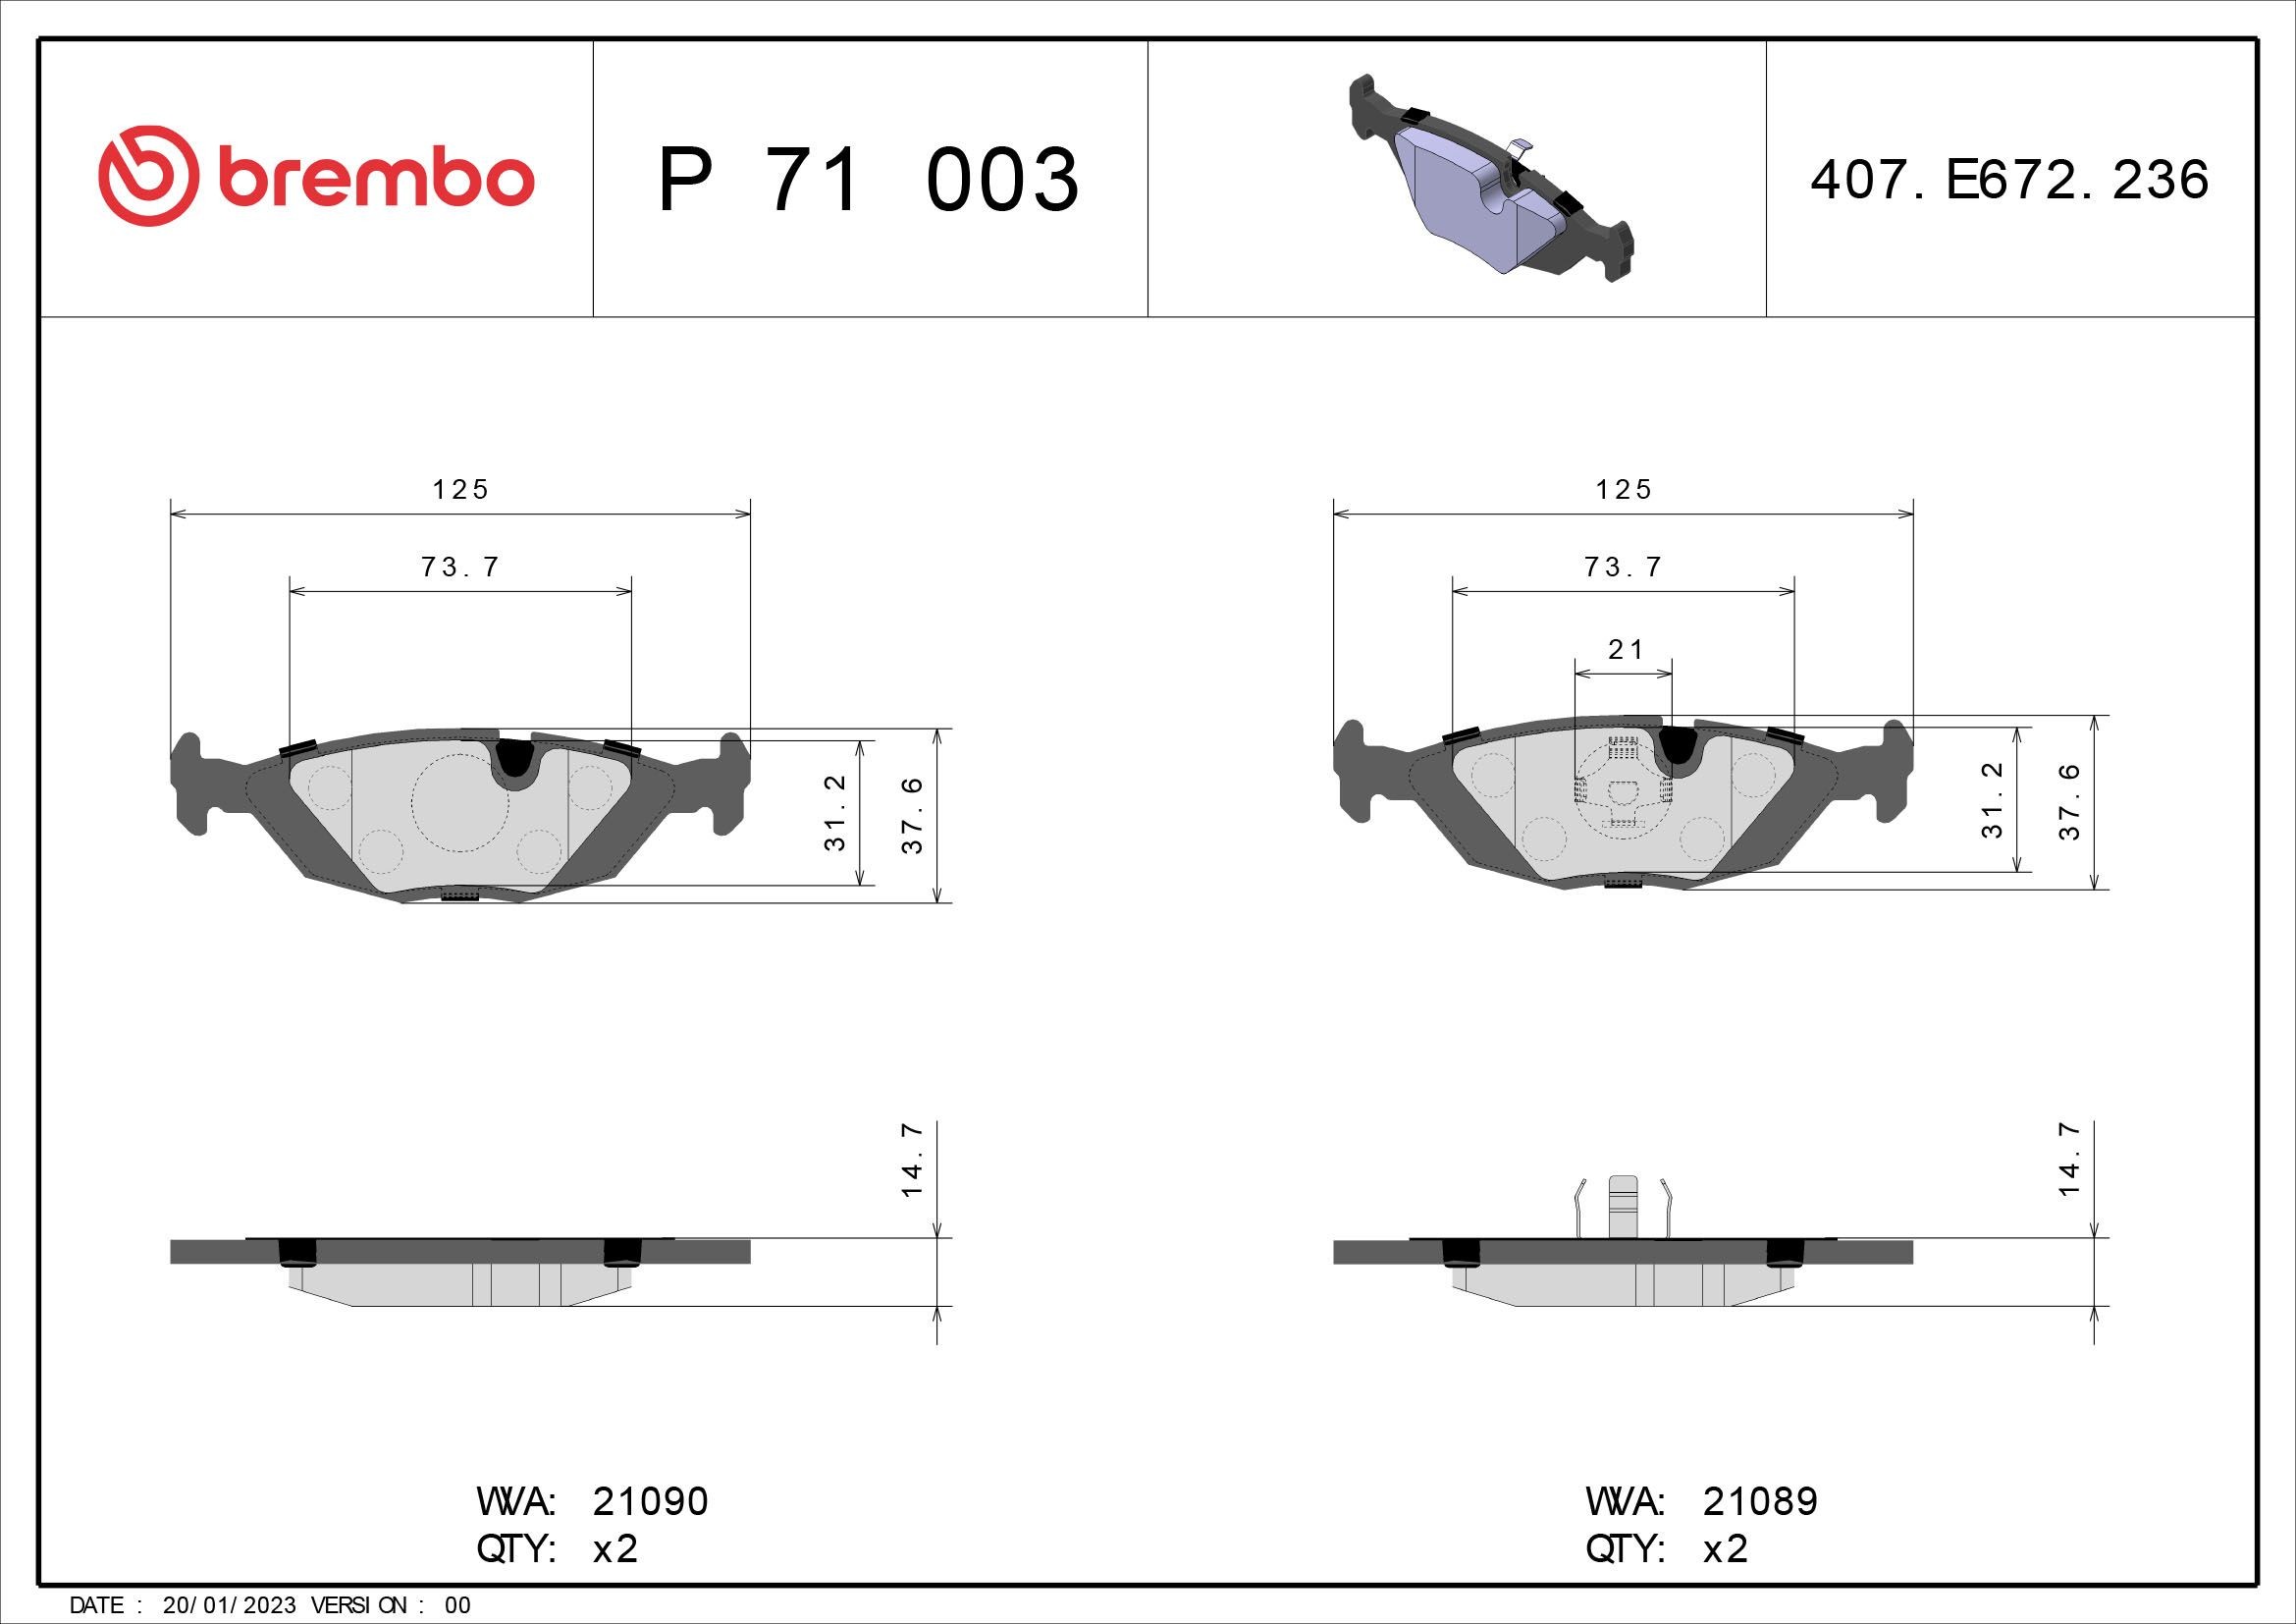 P 71 003 BREMBO Brake pad set SAAB excl. wear warning contact, with piston clip, without accessories